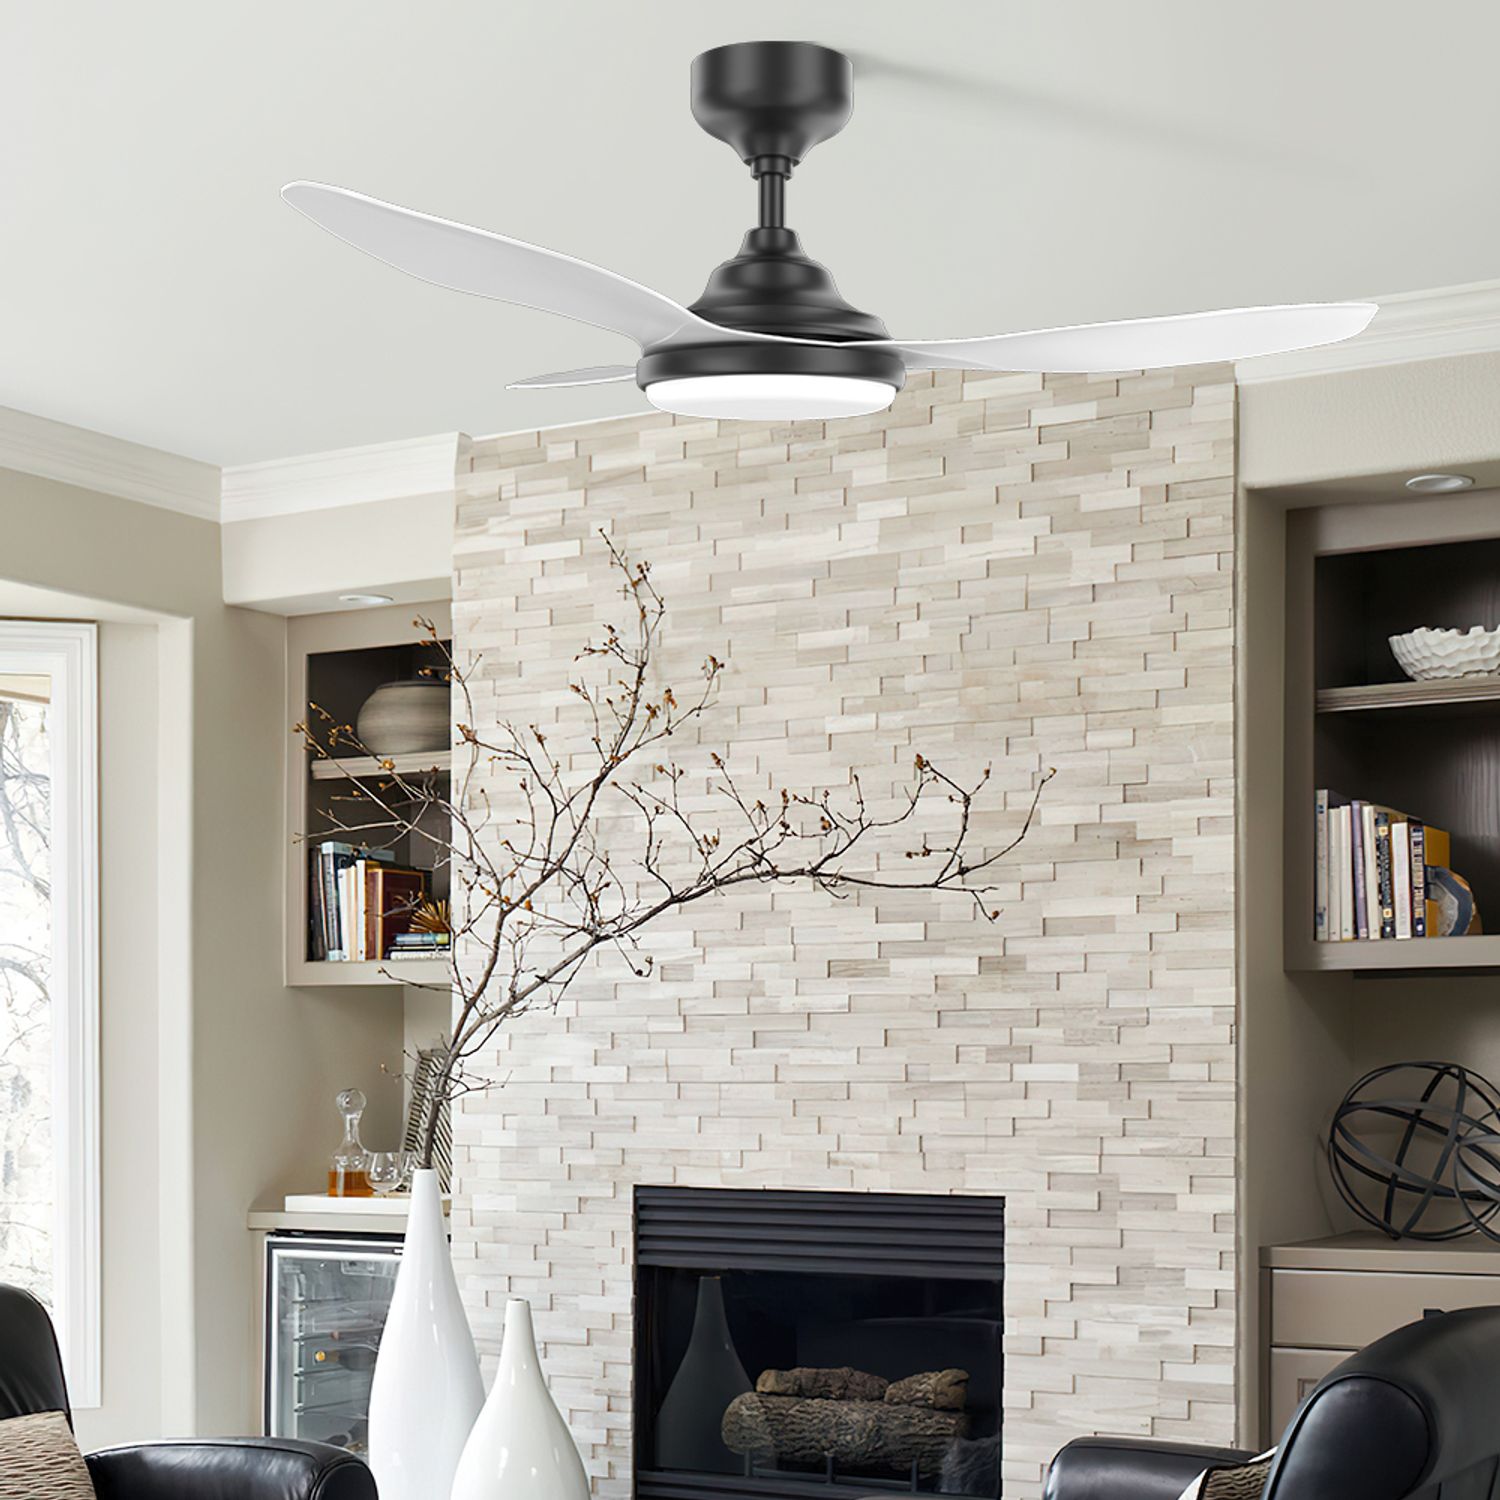 38" Black and White Ceiling Fan with Light in a living room